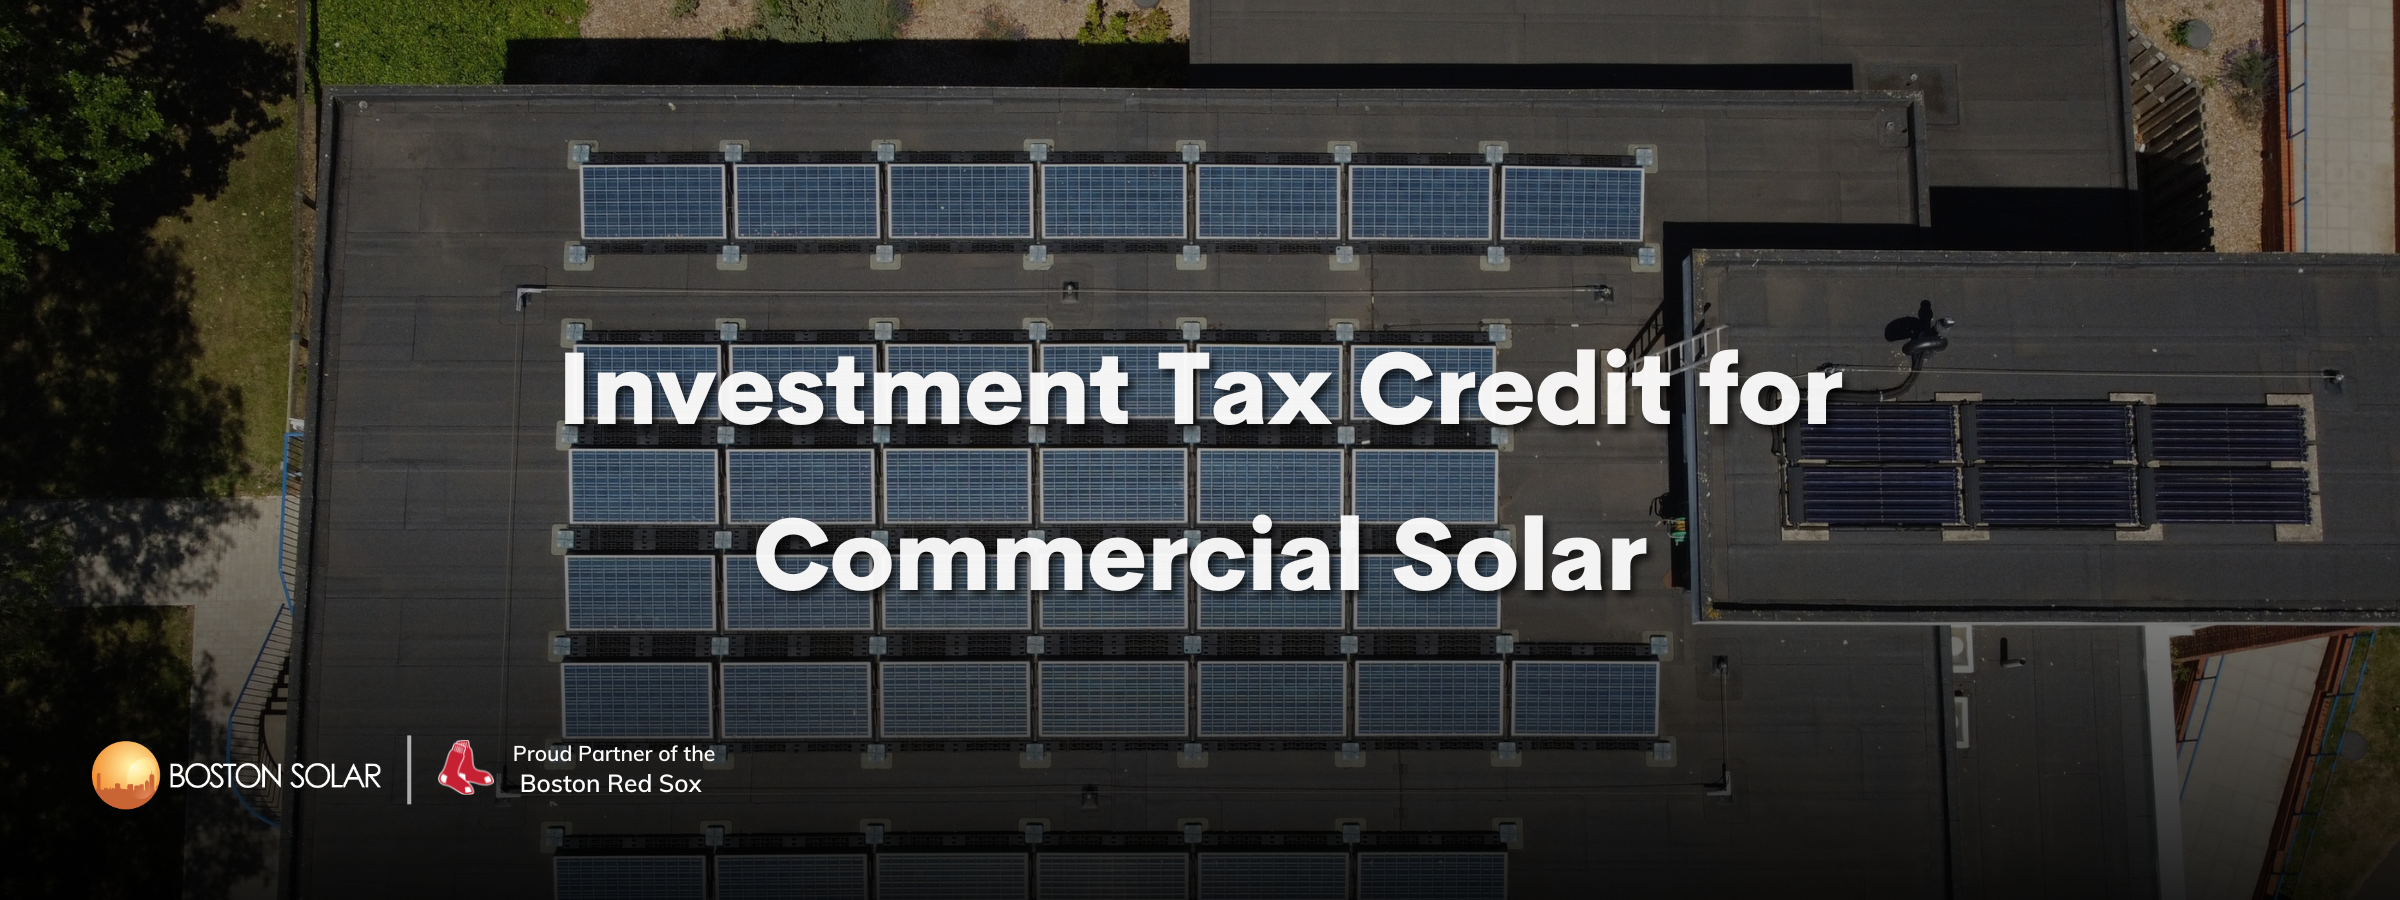 Investment Tax Credit for Commercial Solar